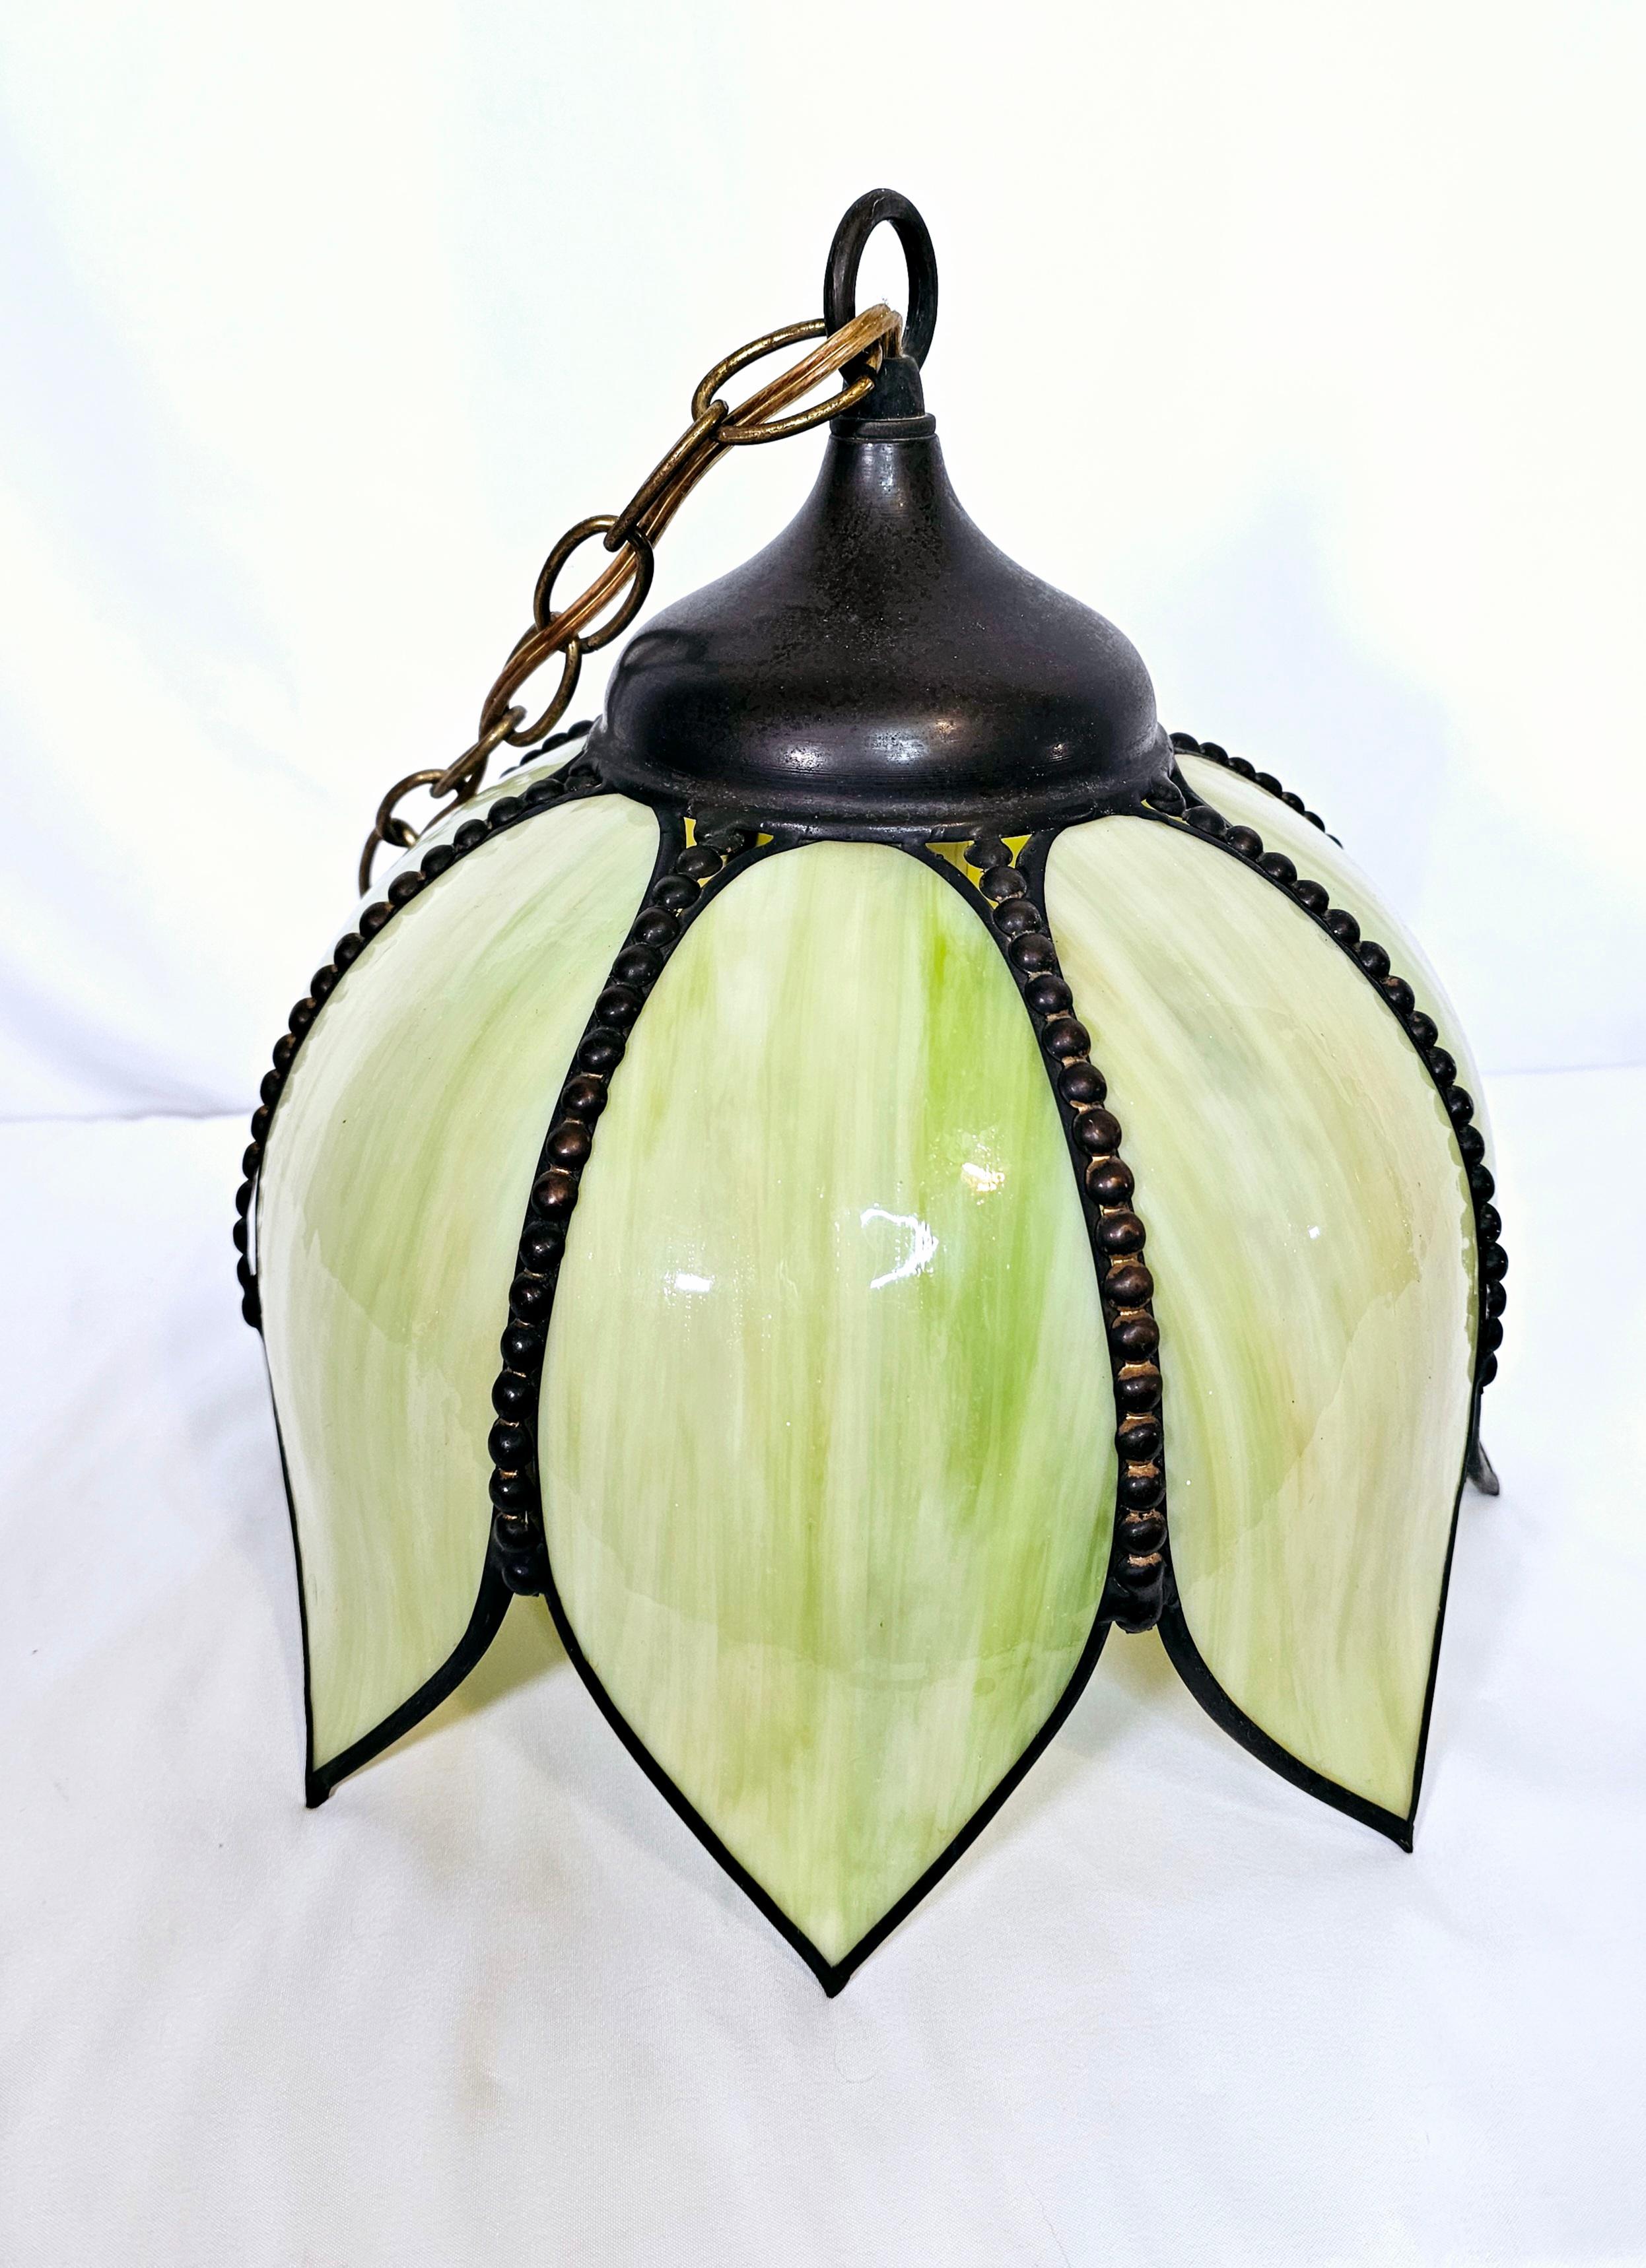 Beautiful yellow green slag glass tulip pendant light. Art Nouveau style Brass hardware and trim. Original chain is about 10' long.

Vintage art nouveau style, yellow green slag glass tulip pendant light. Comprised of 8 slag glass petals and black